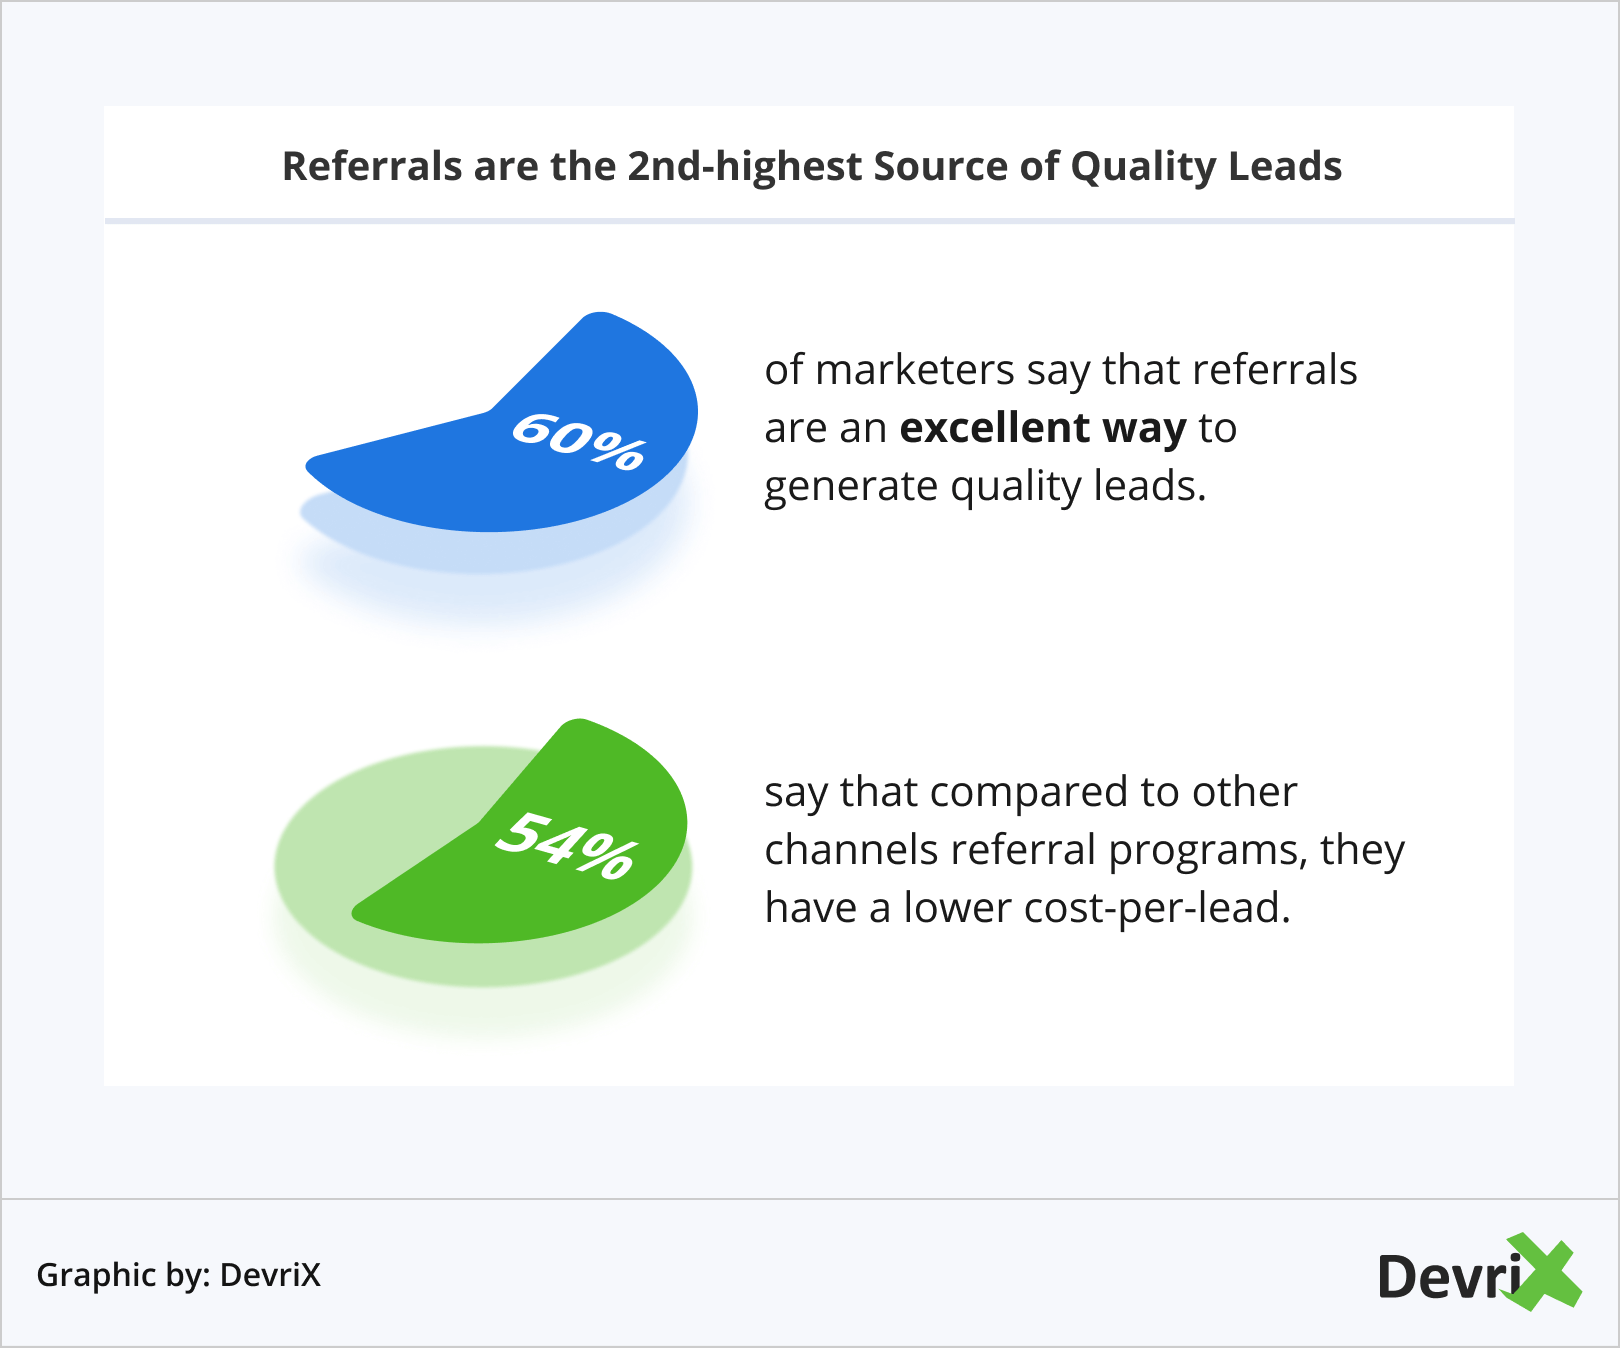 Referrals are the 2nd-highest Source of Quality Leads